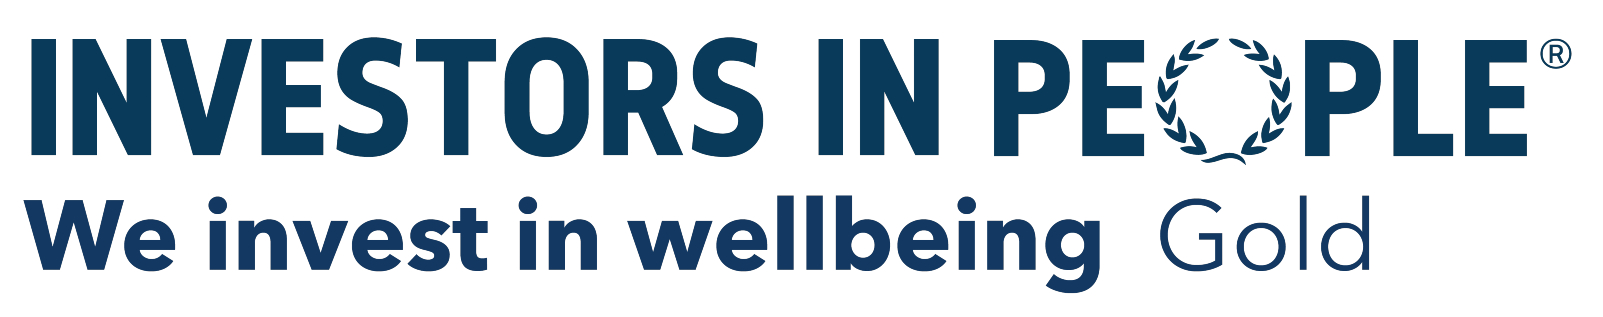 image for the Investors in People - Wellbeing accreditation